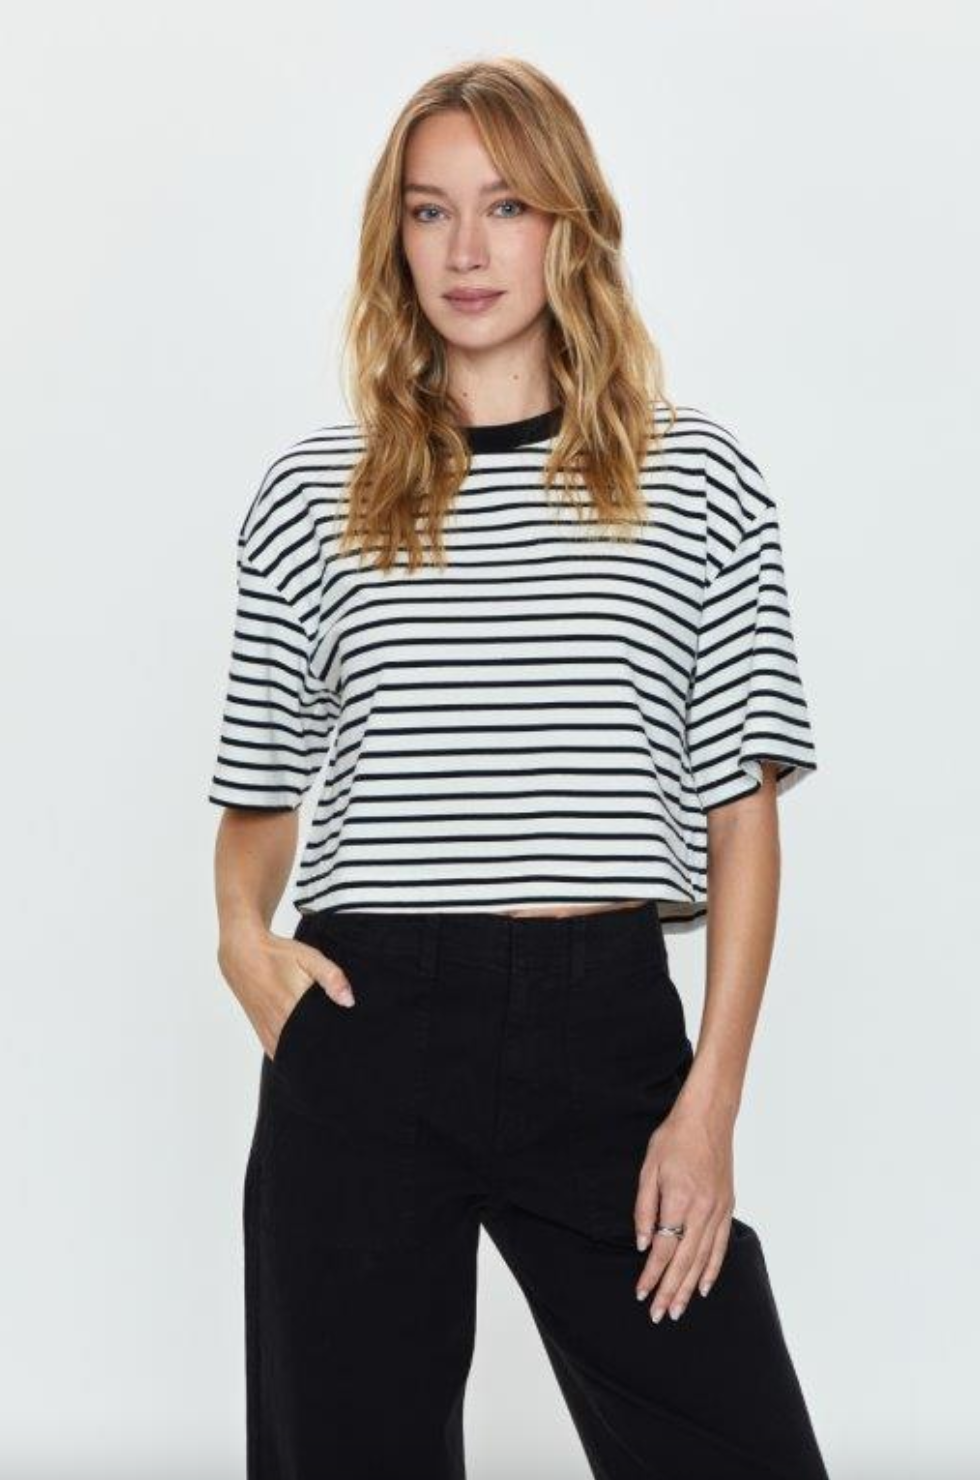 A woman wearing a Pistola Mae Cropped Tee, a Los Angeles-based black and white striped T-shirt, and black pants, standing against a white background, with her hand on her hip and looking directly at the camera.